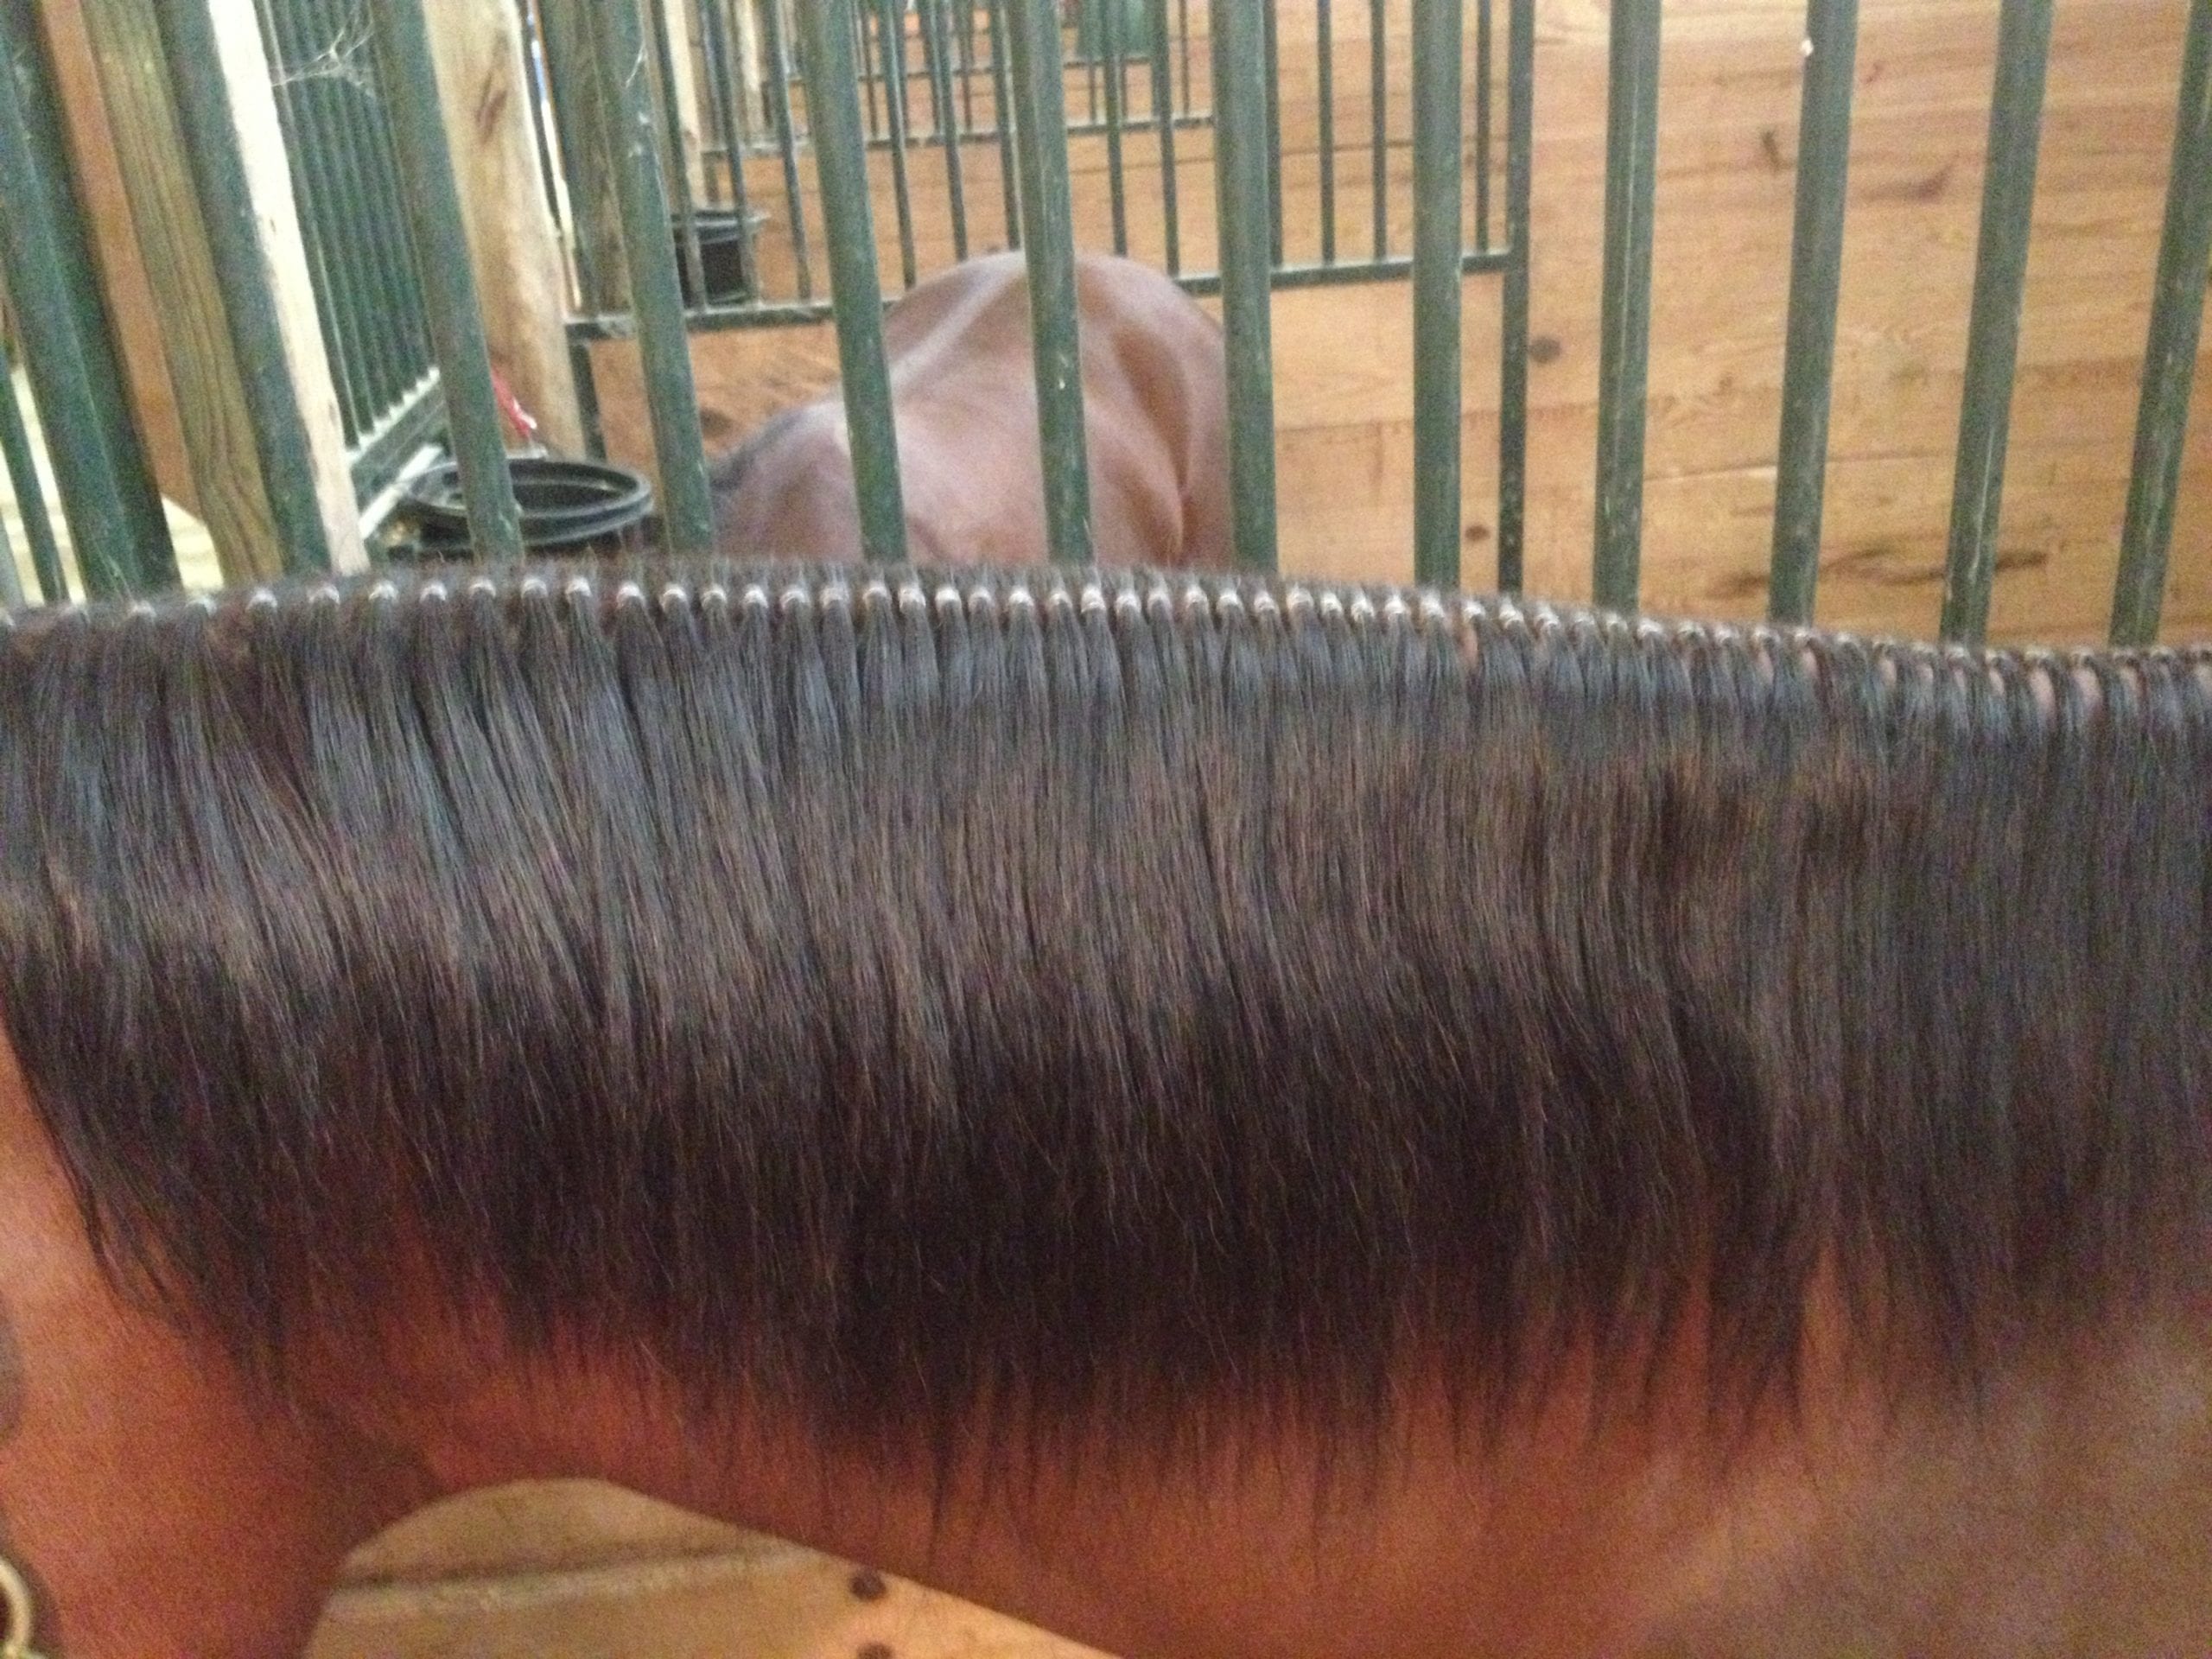 Long Manes banded one row